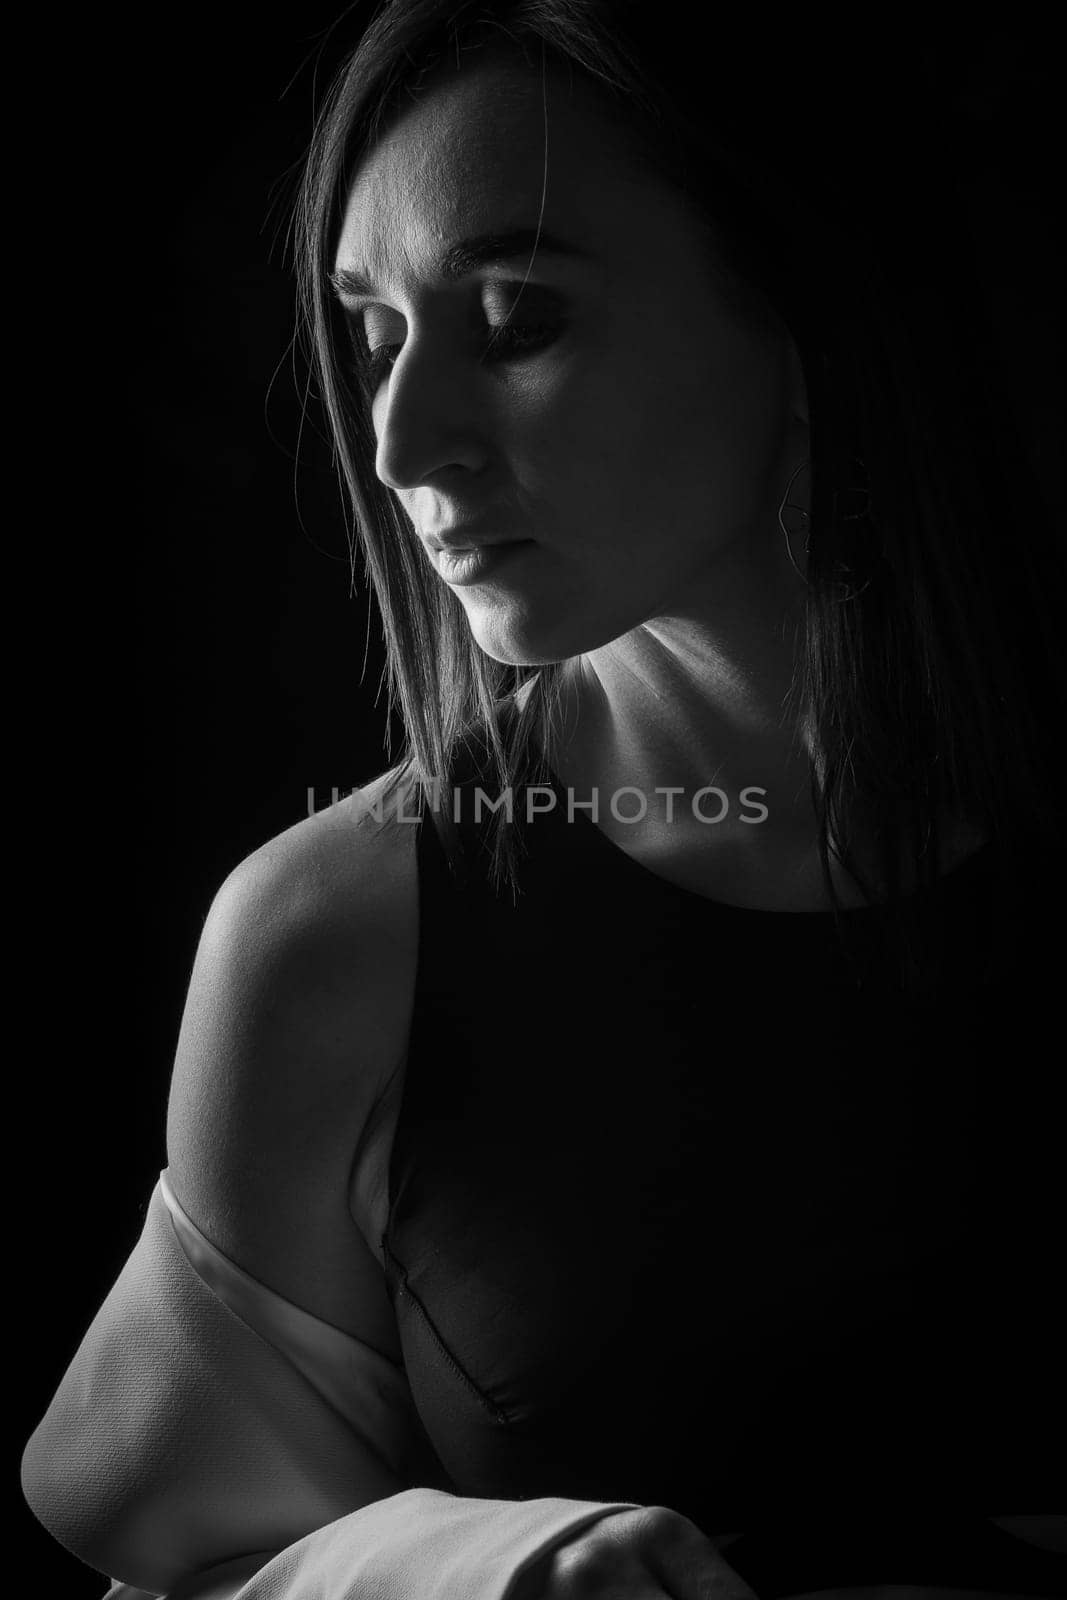 A business woman showing off her body in her underwear. Shot in the studio on a dark background.